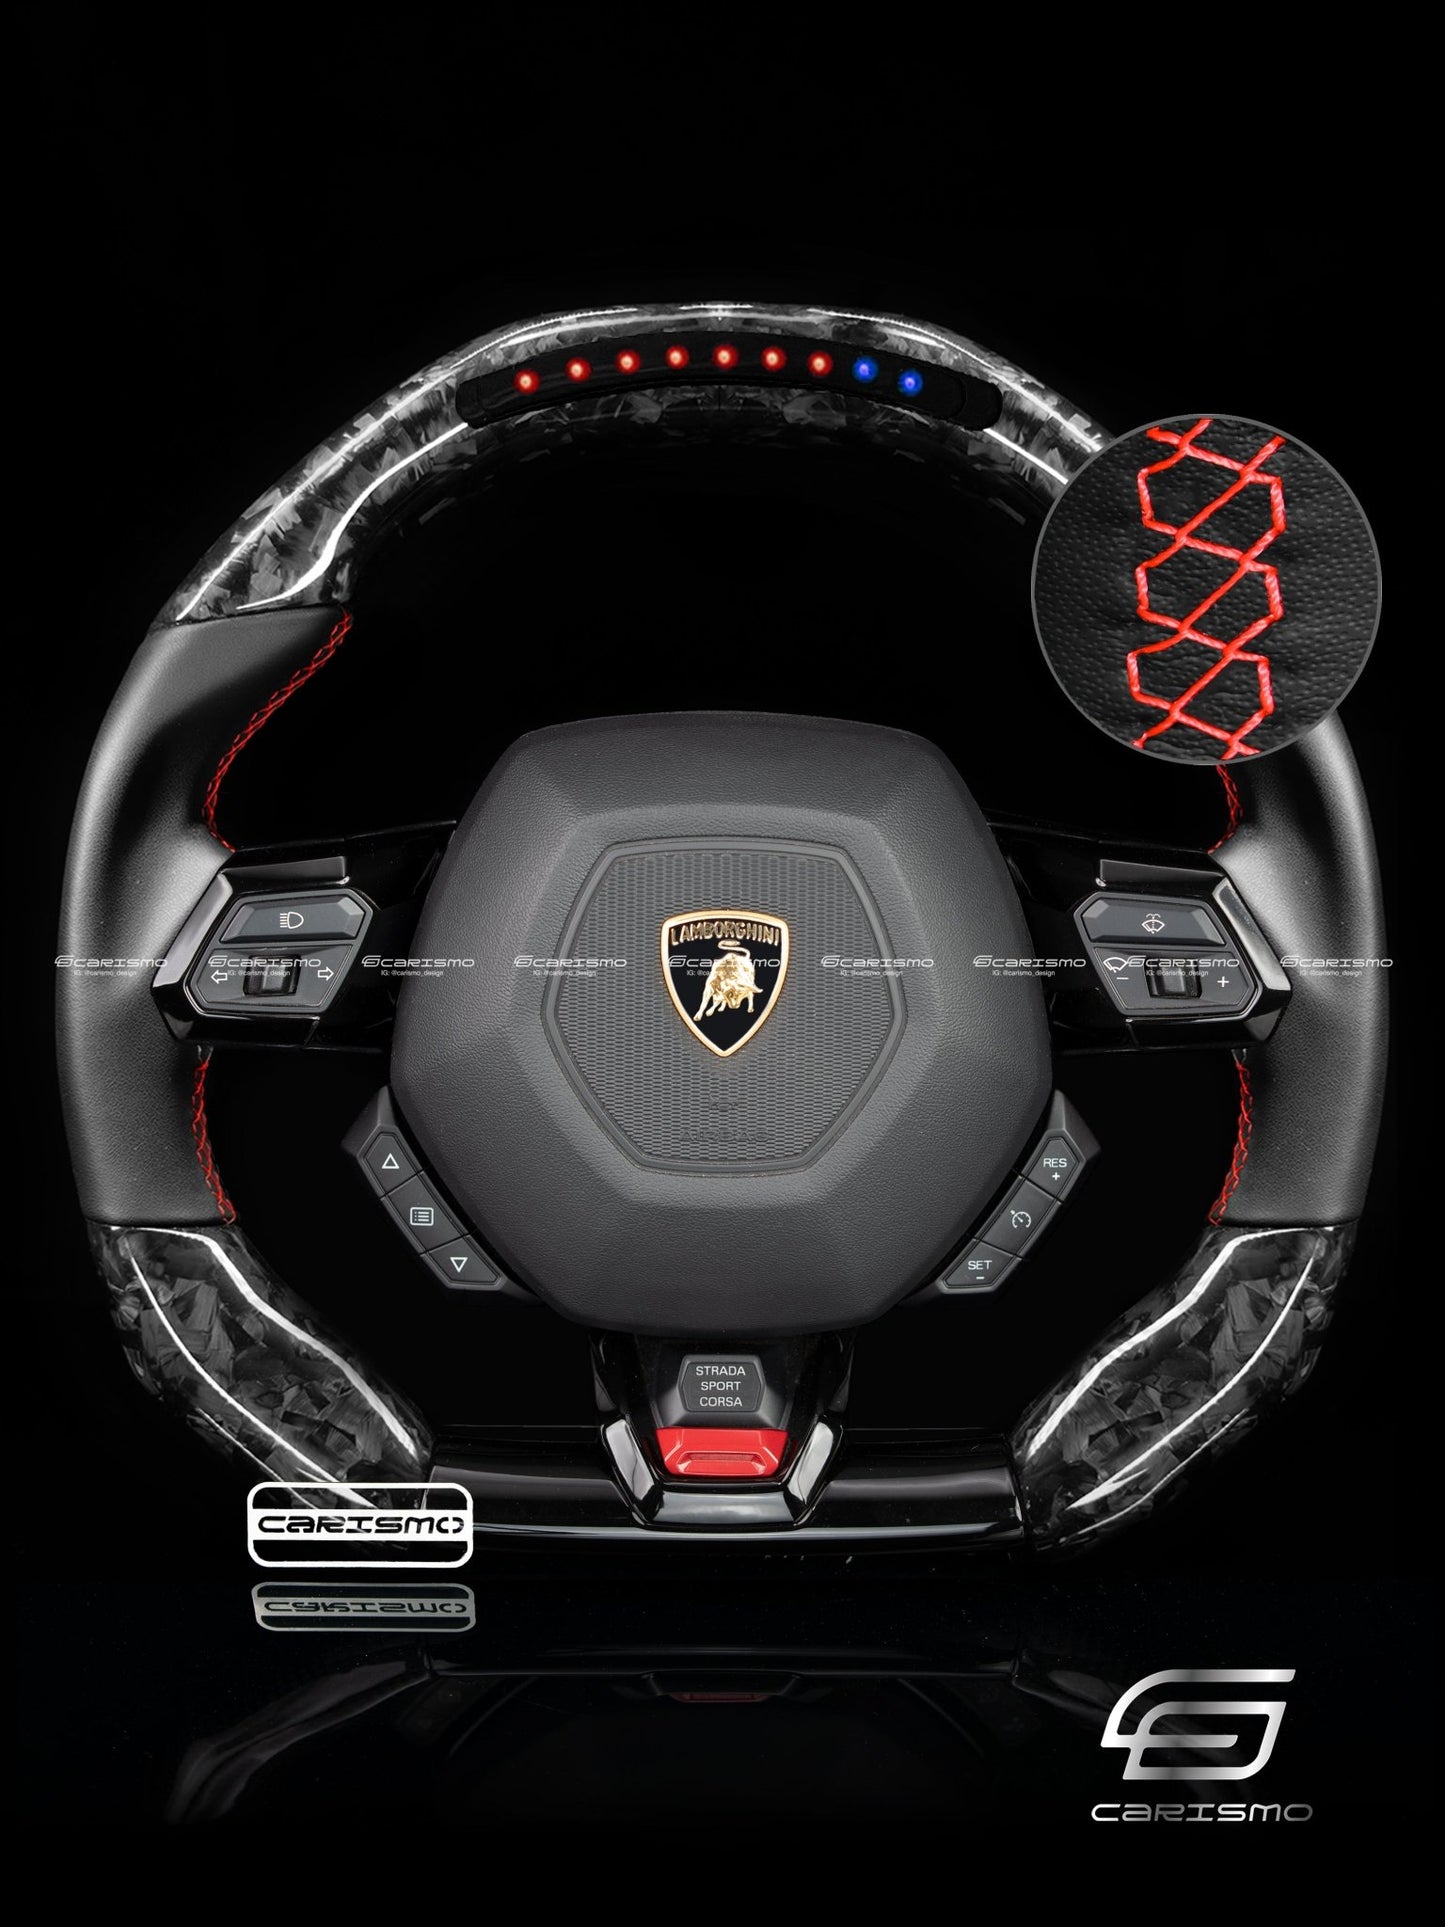 Carismo Steering Wheel For Lamborghini Huracan - Sequential RPM LED - Gloss Forged Carbon - Smooth Leather - Carismo